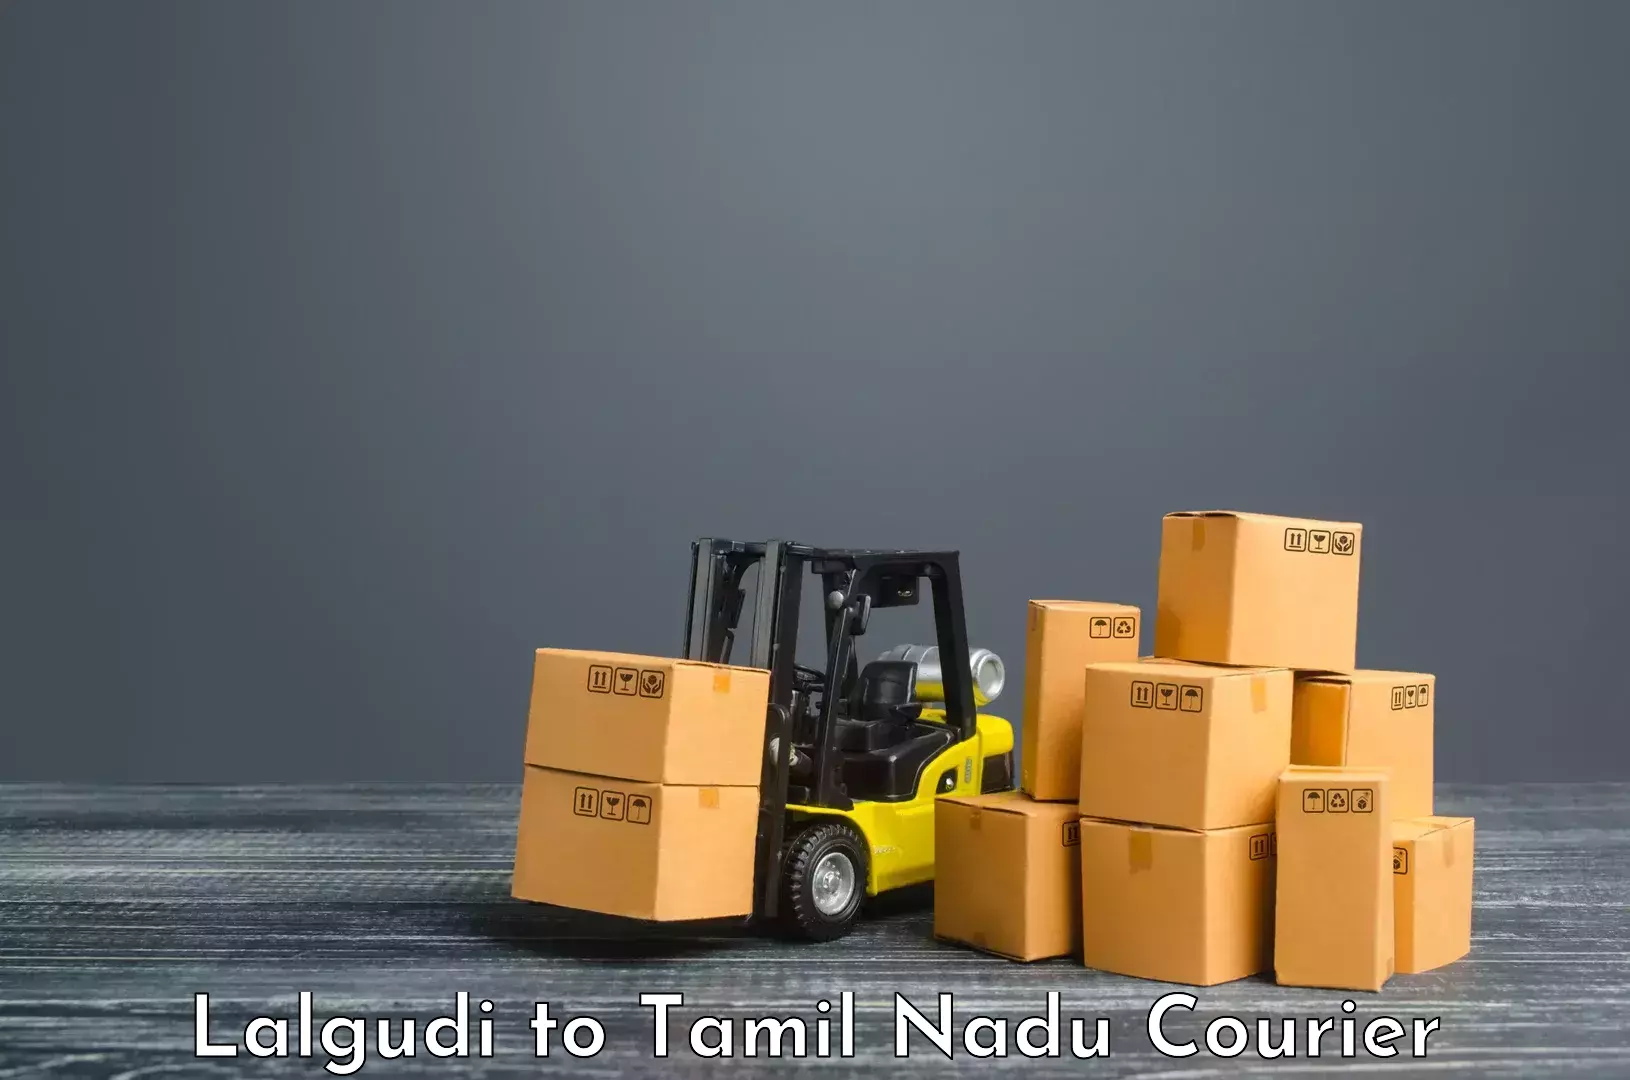 Courier service booking Lalgudi to Vriddhachalam